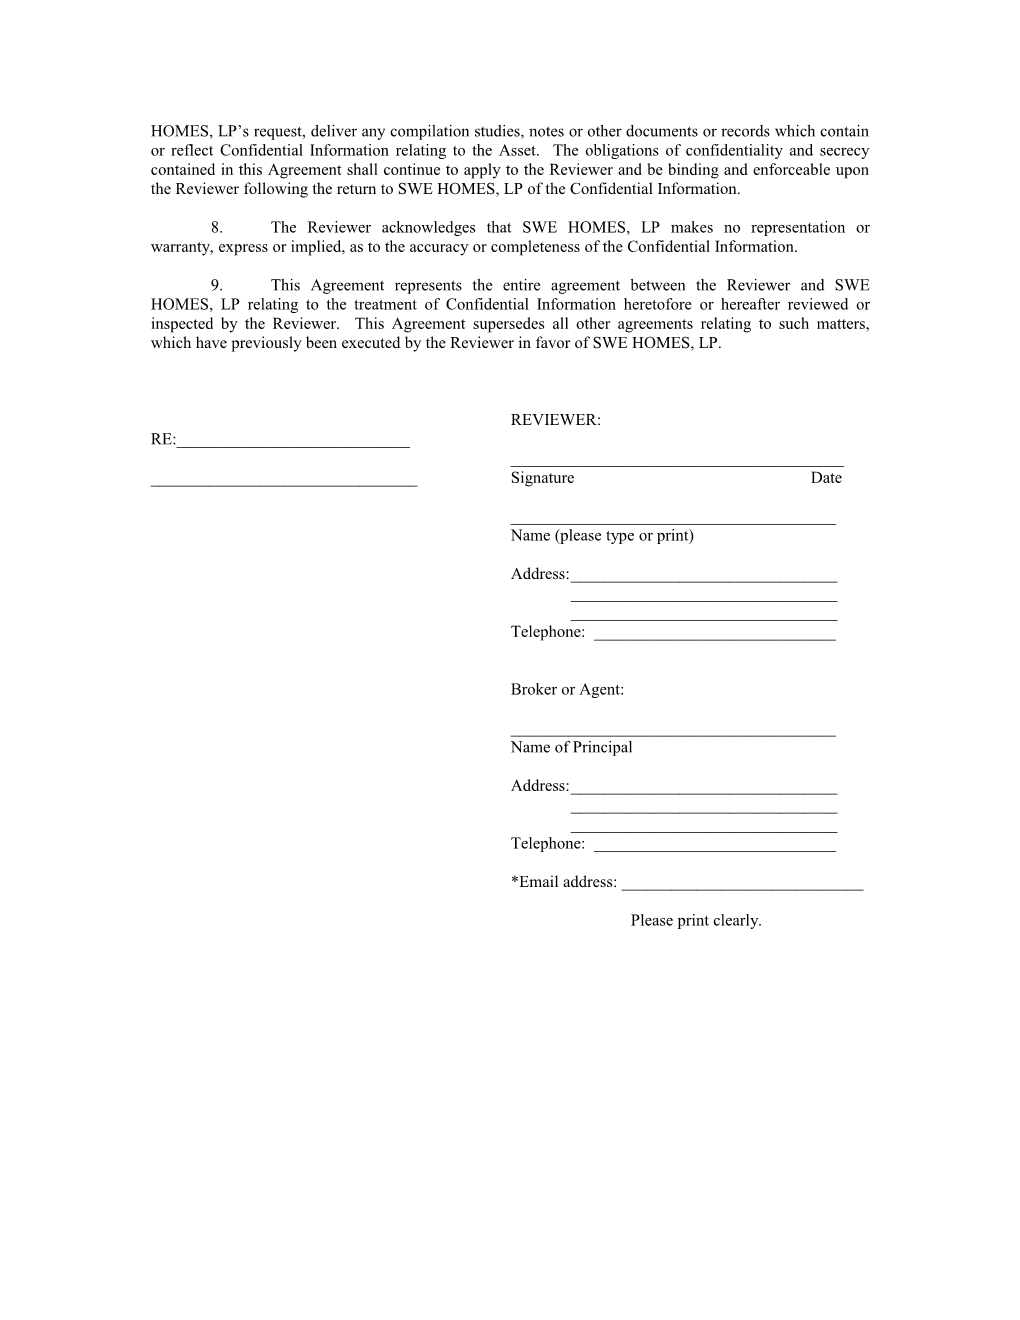 Confidentiality Agreement for Review of Asset